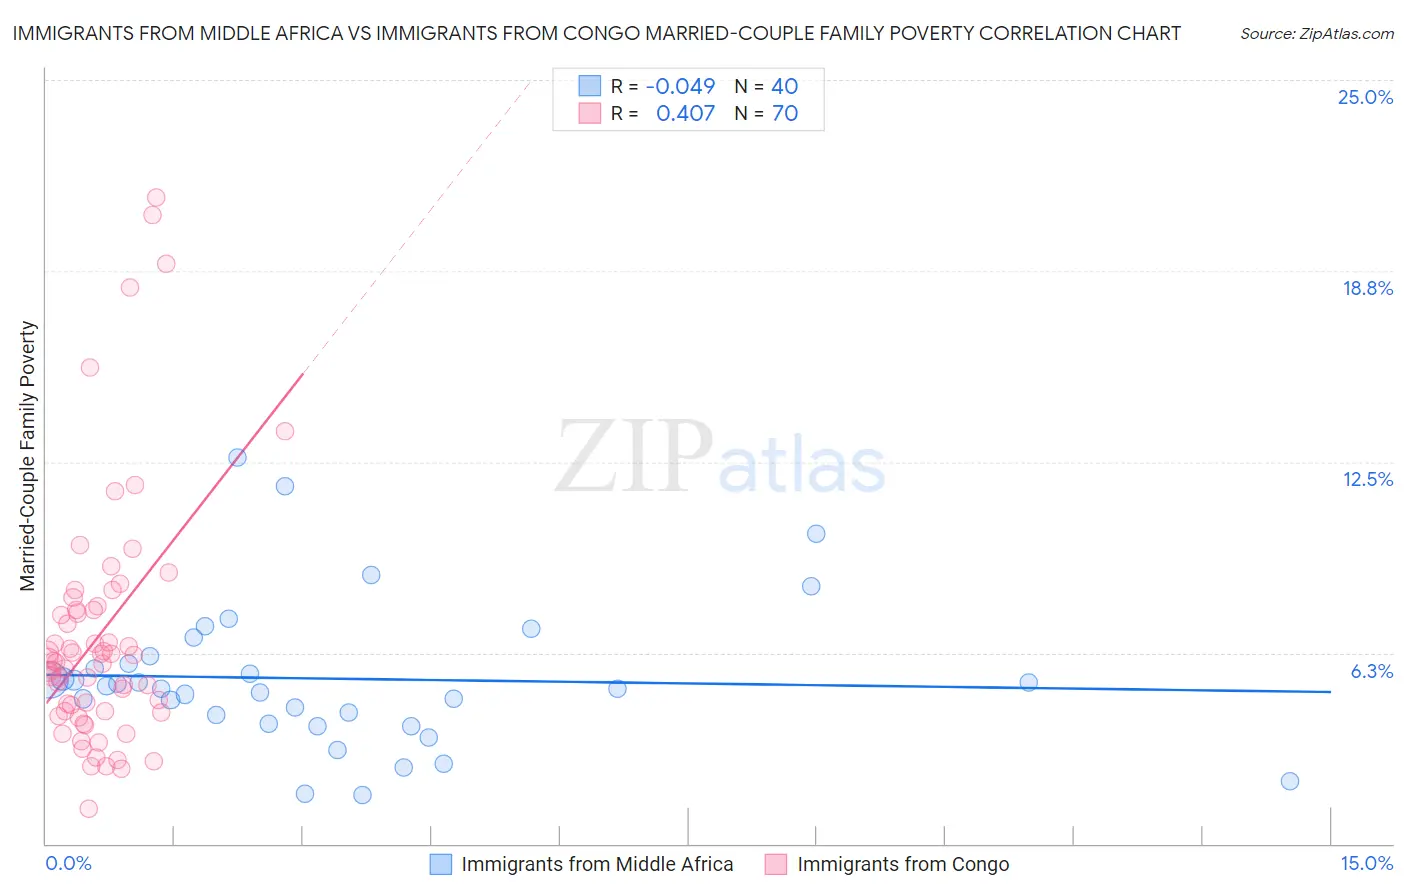 Immigrants from Middle Africa vs Immigrants from Congo Married-Couple Family Poverty